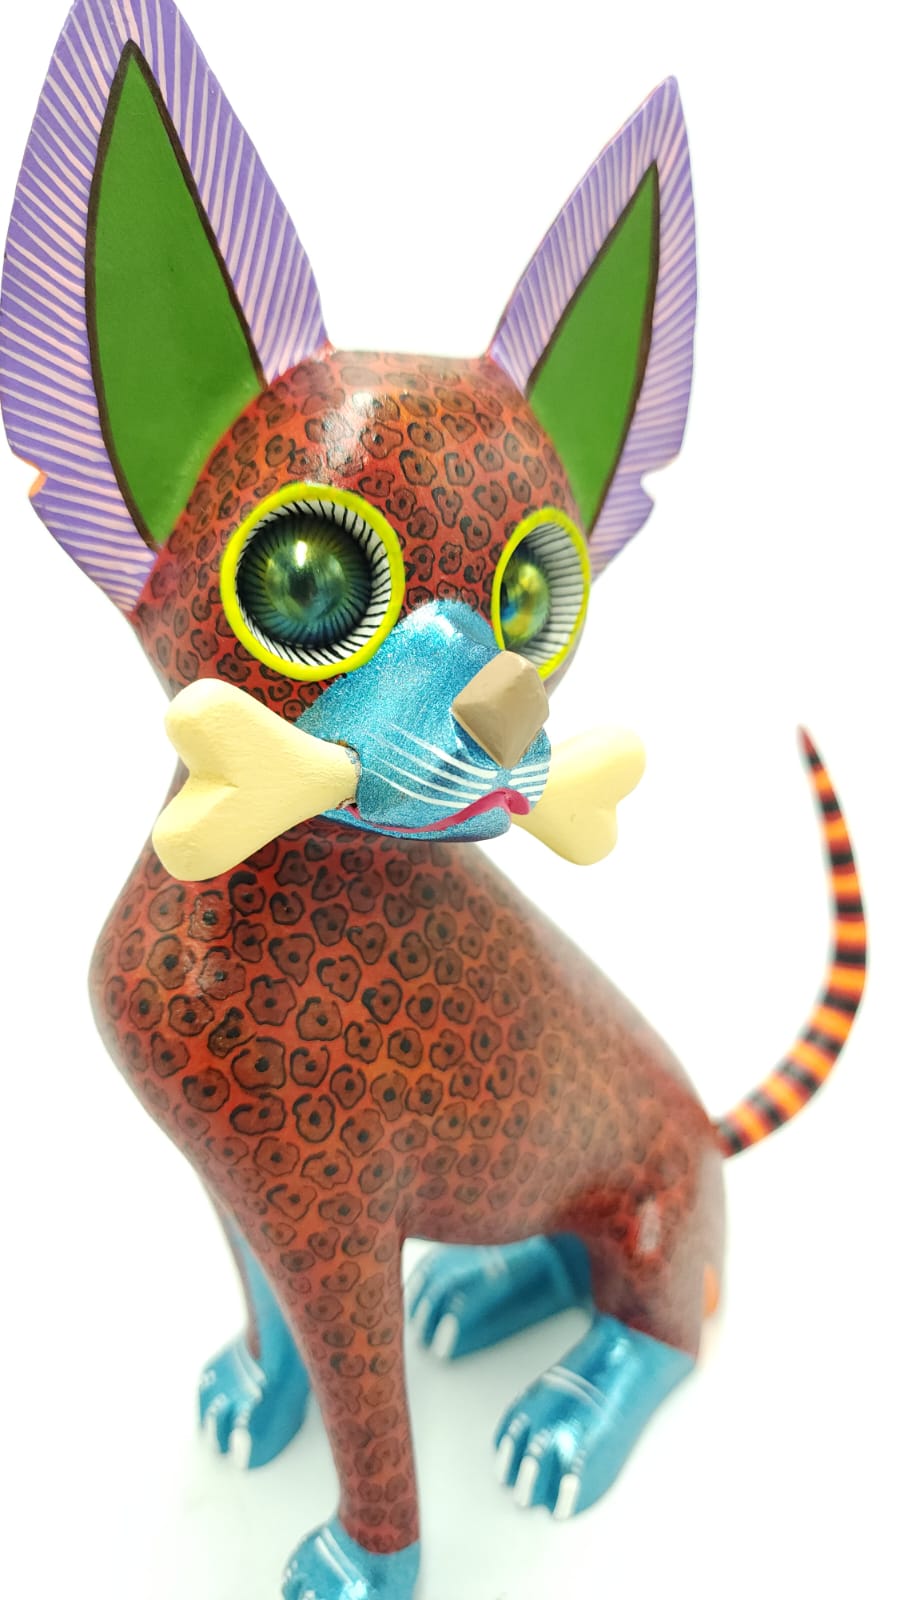 Great Mexican Oaxacan Wood Carving Alebrije Chihuahua By Isaac Fabian PP5435